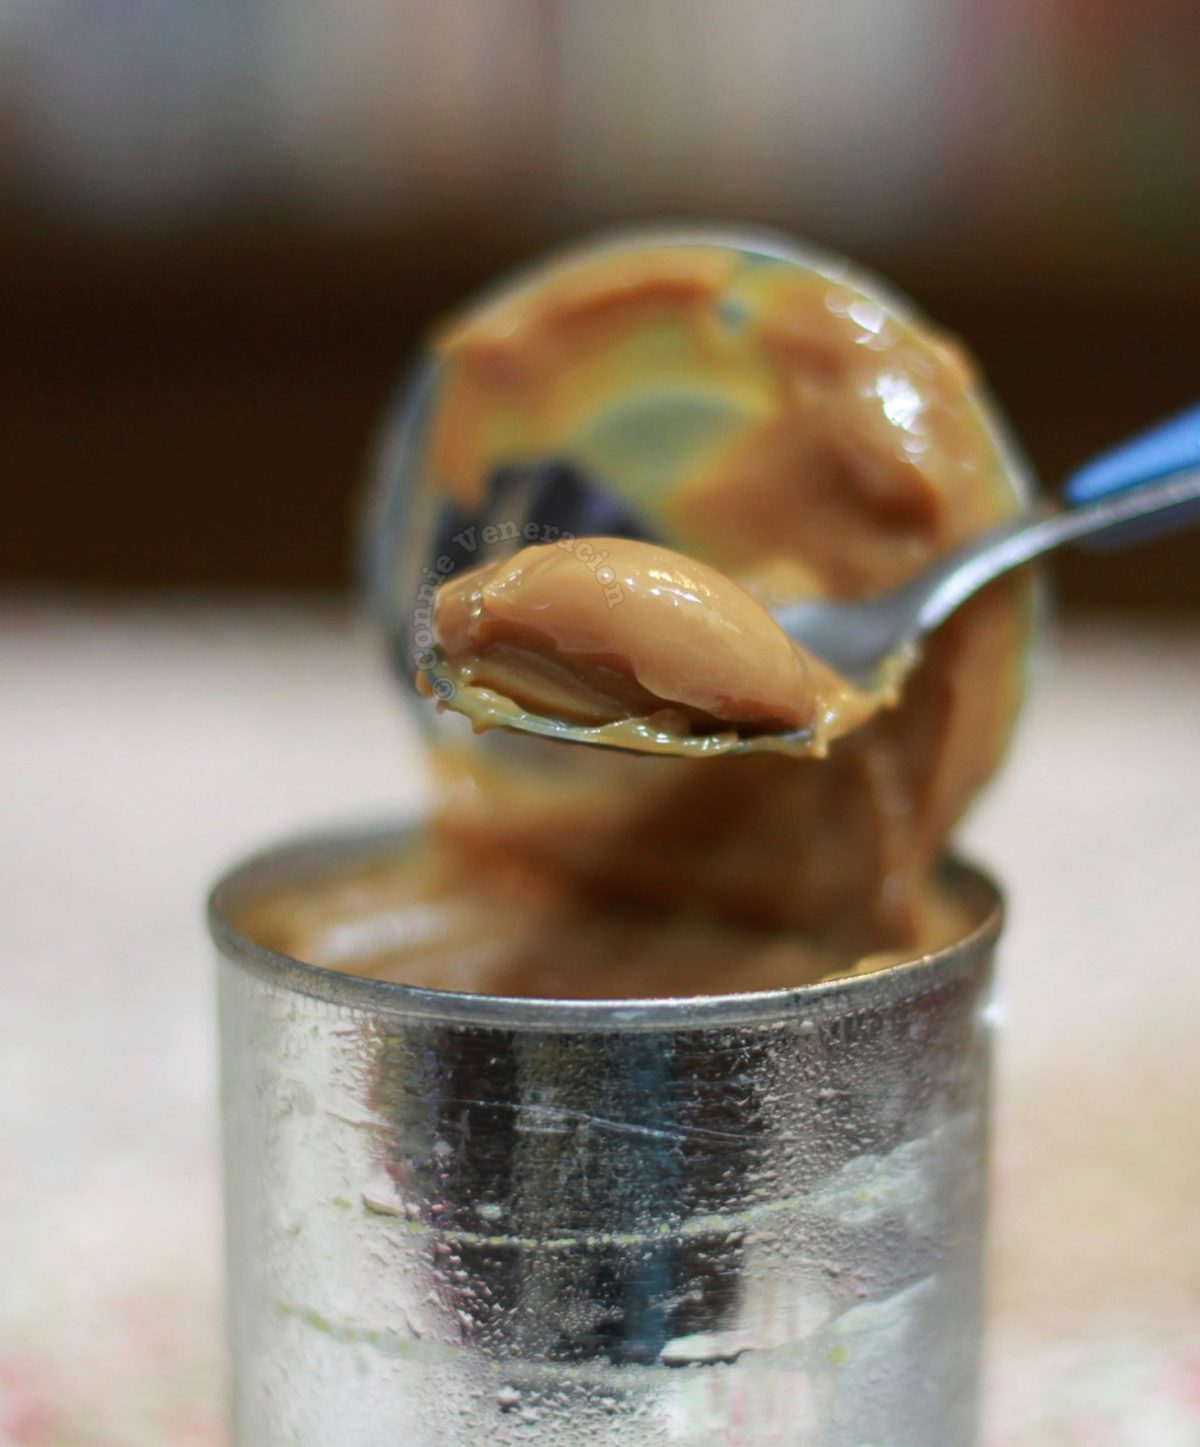 Dulce de leche made by boiling an unopened can of sweetened condensed milk